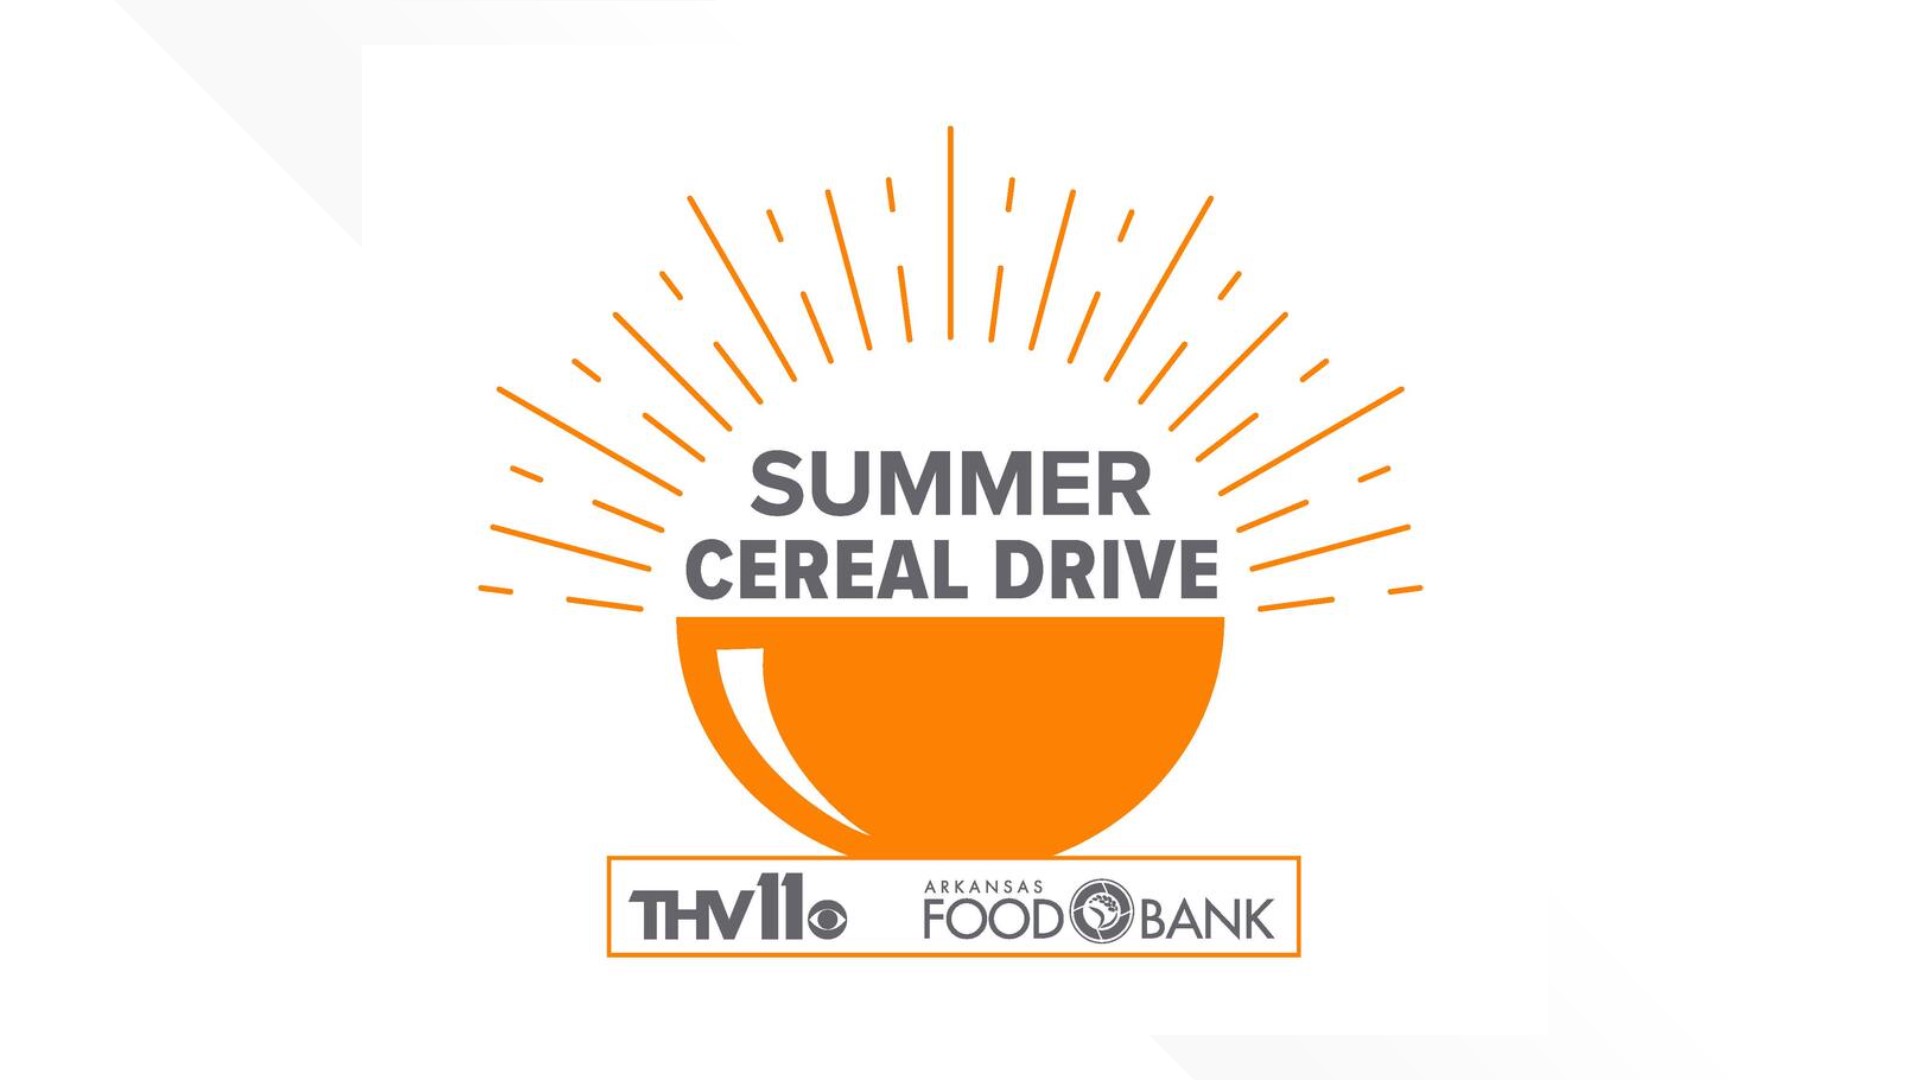 Tom Brannon shares information ahead of the 24th annual Summer Cereal Drive benefitting the Arkansas Foodbank.